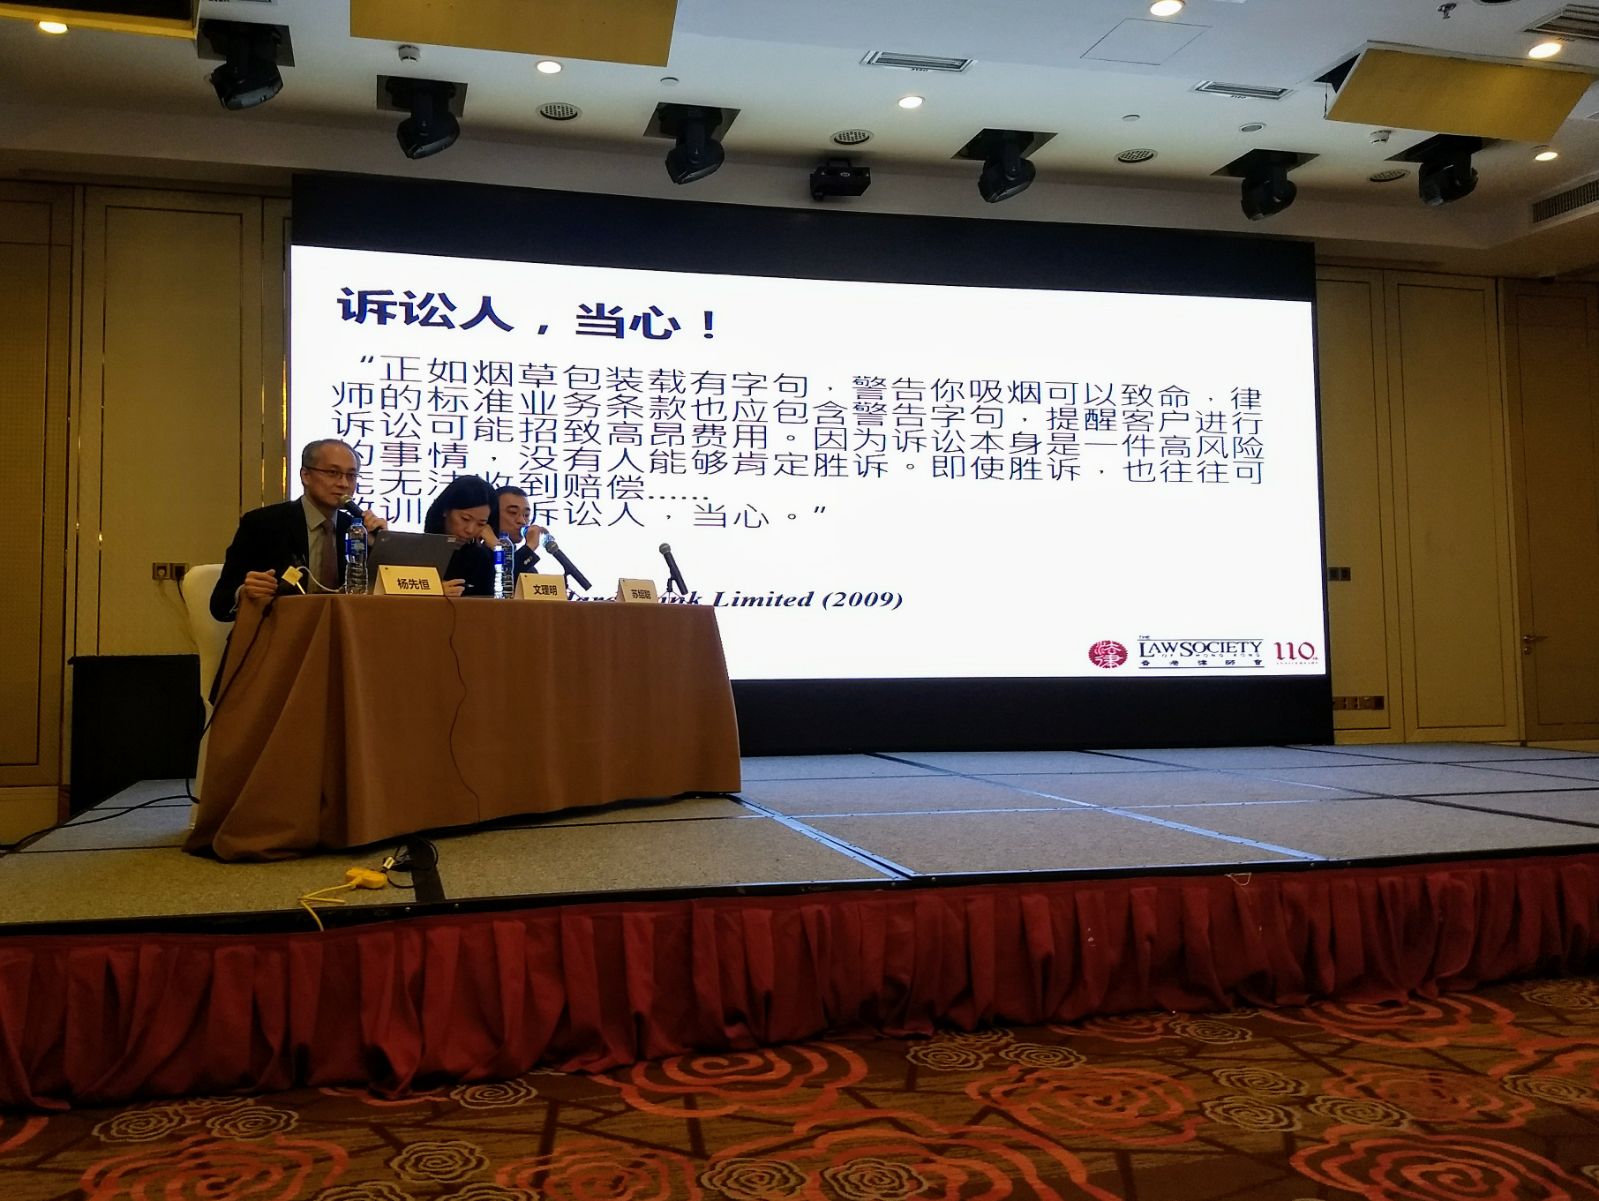 Dr Lawrence Yeung gave a seminar in Guangzhou on litigation risks